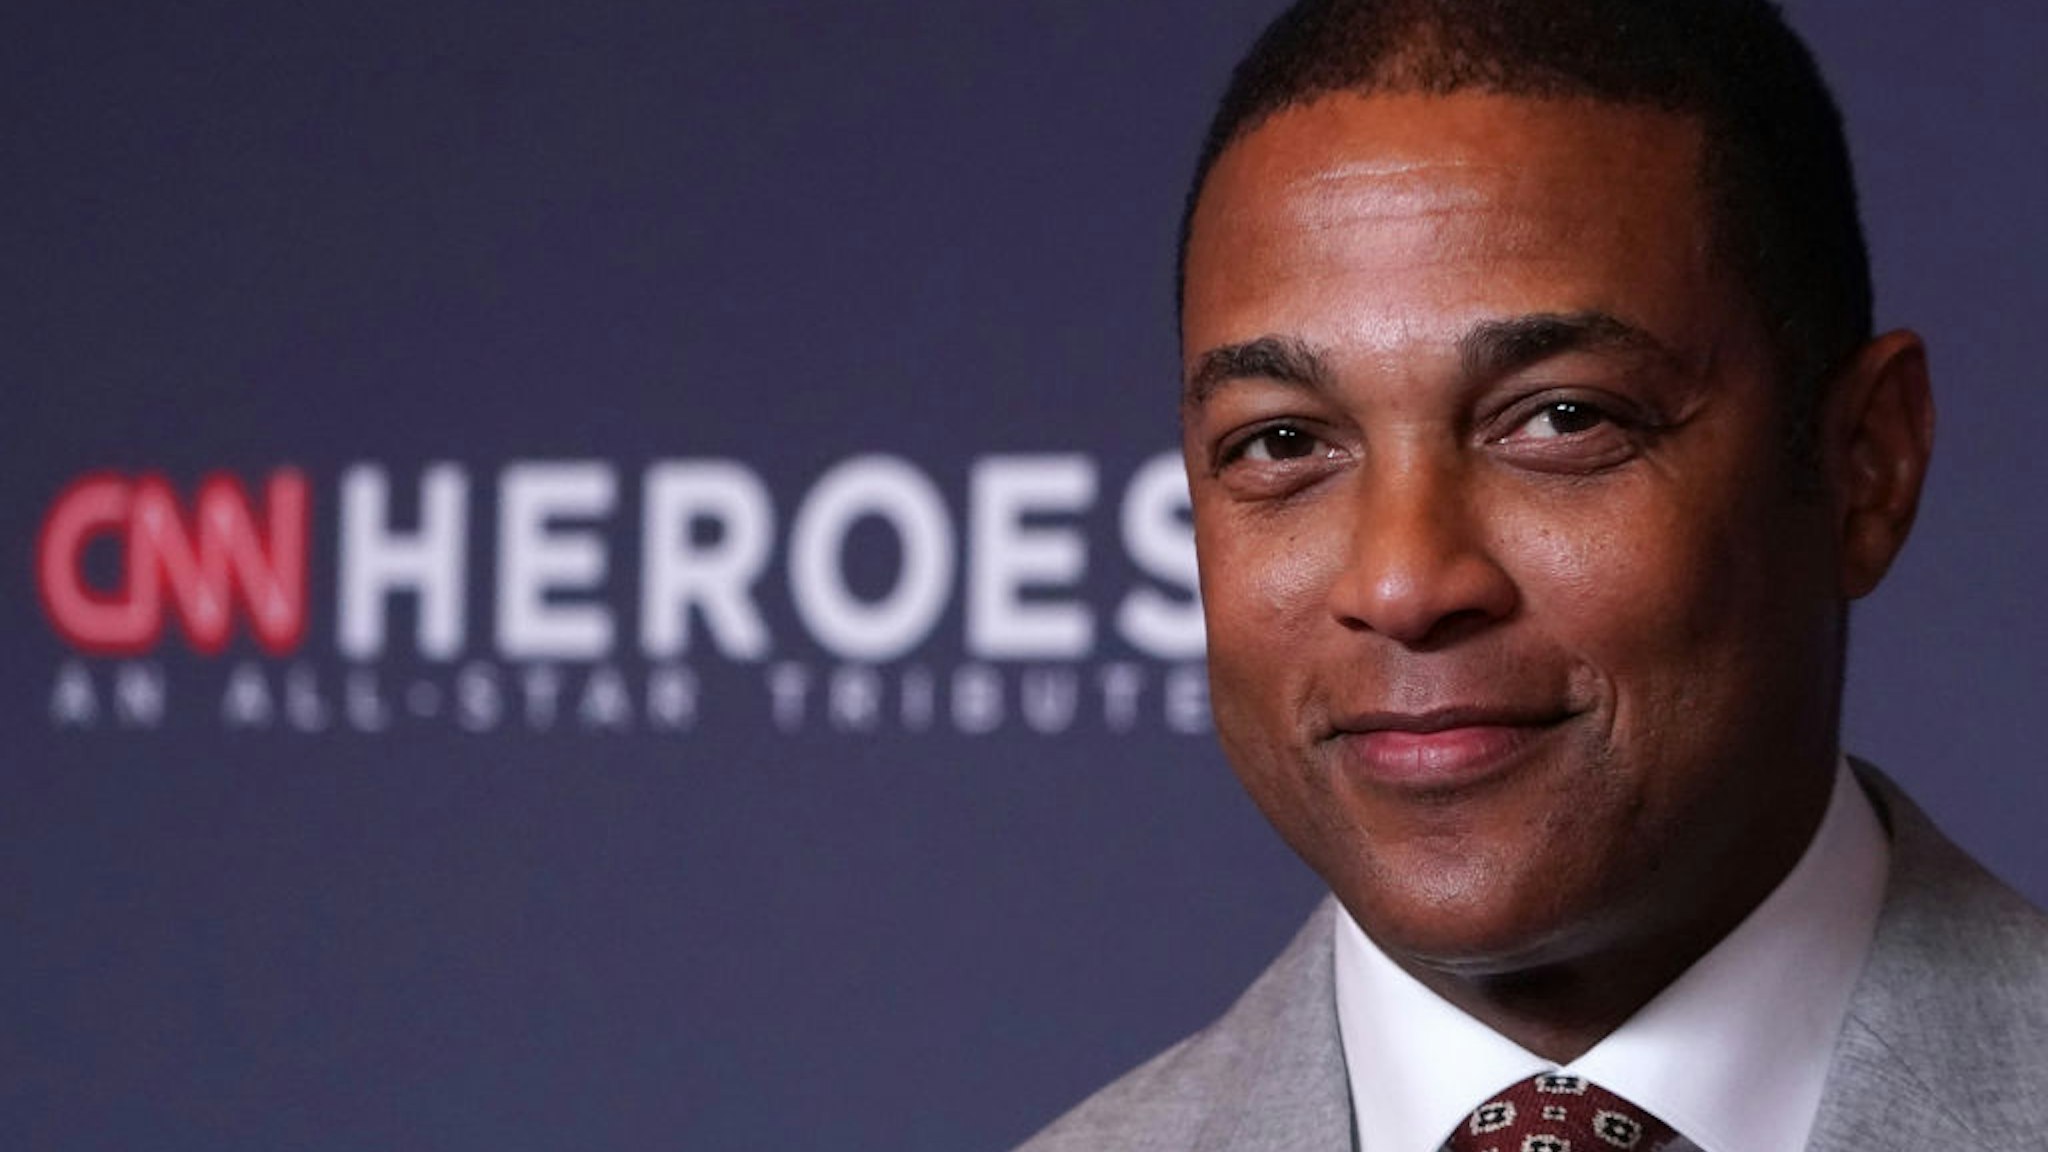 Don Lemon attends the 13th Annual CNN Heroes at the American Museum of Natural History on December 08, 2019 in New York City.